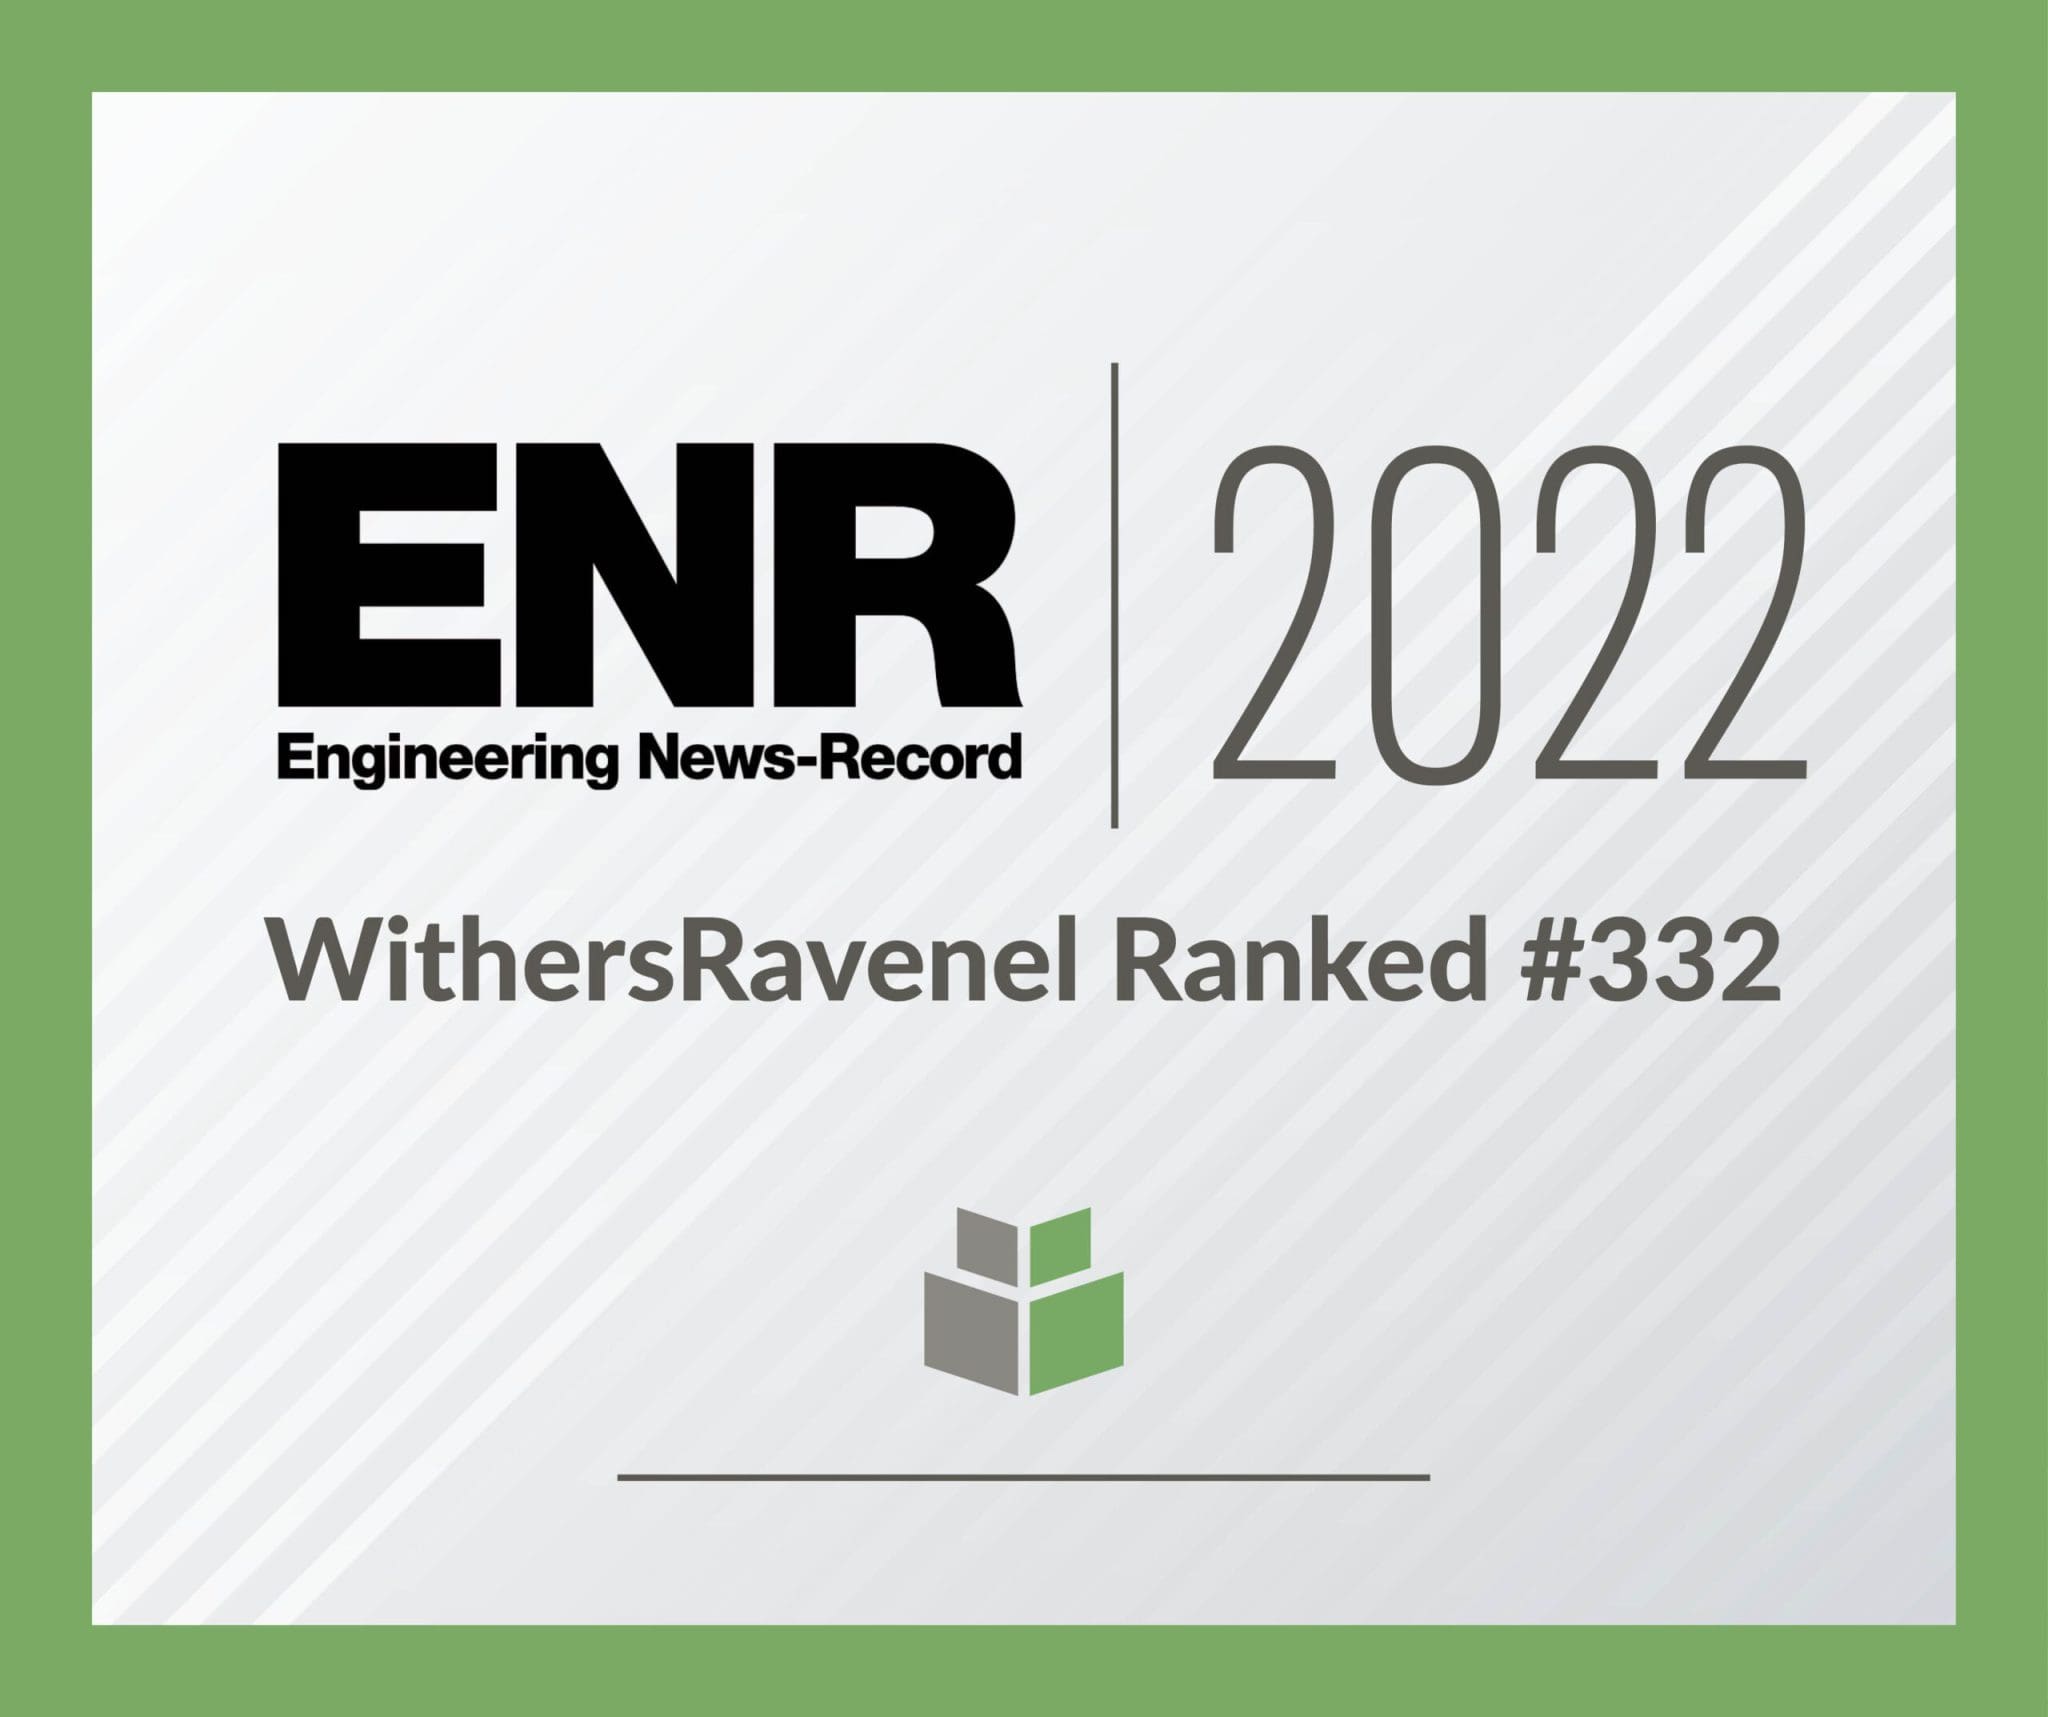 WithersRavenel ranked among top engineering firms on ENR Top 500 list